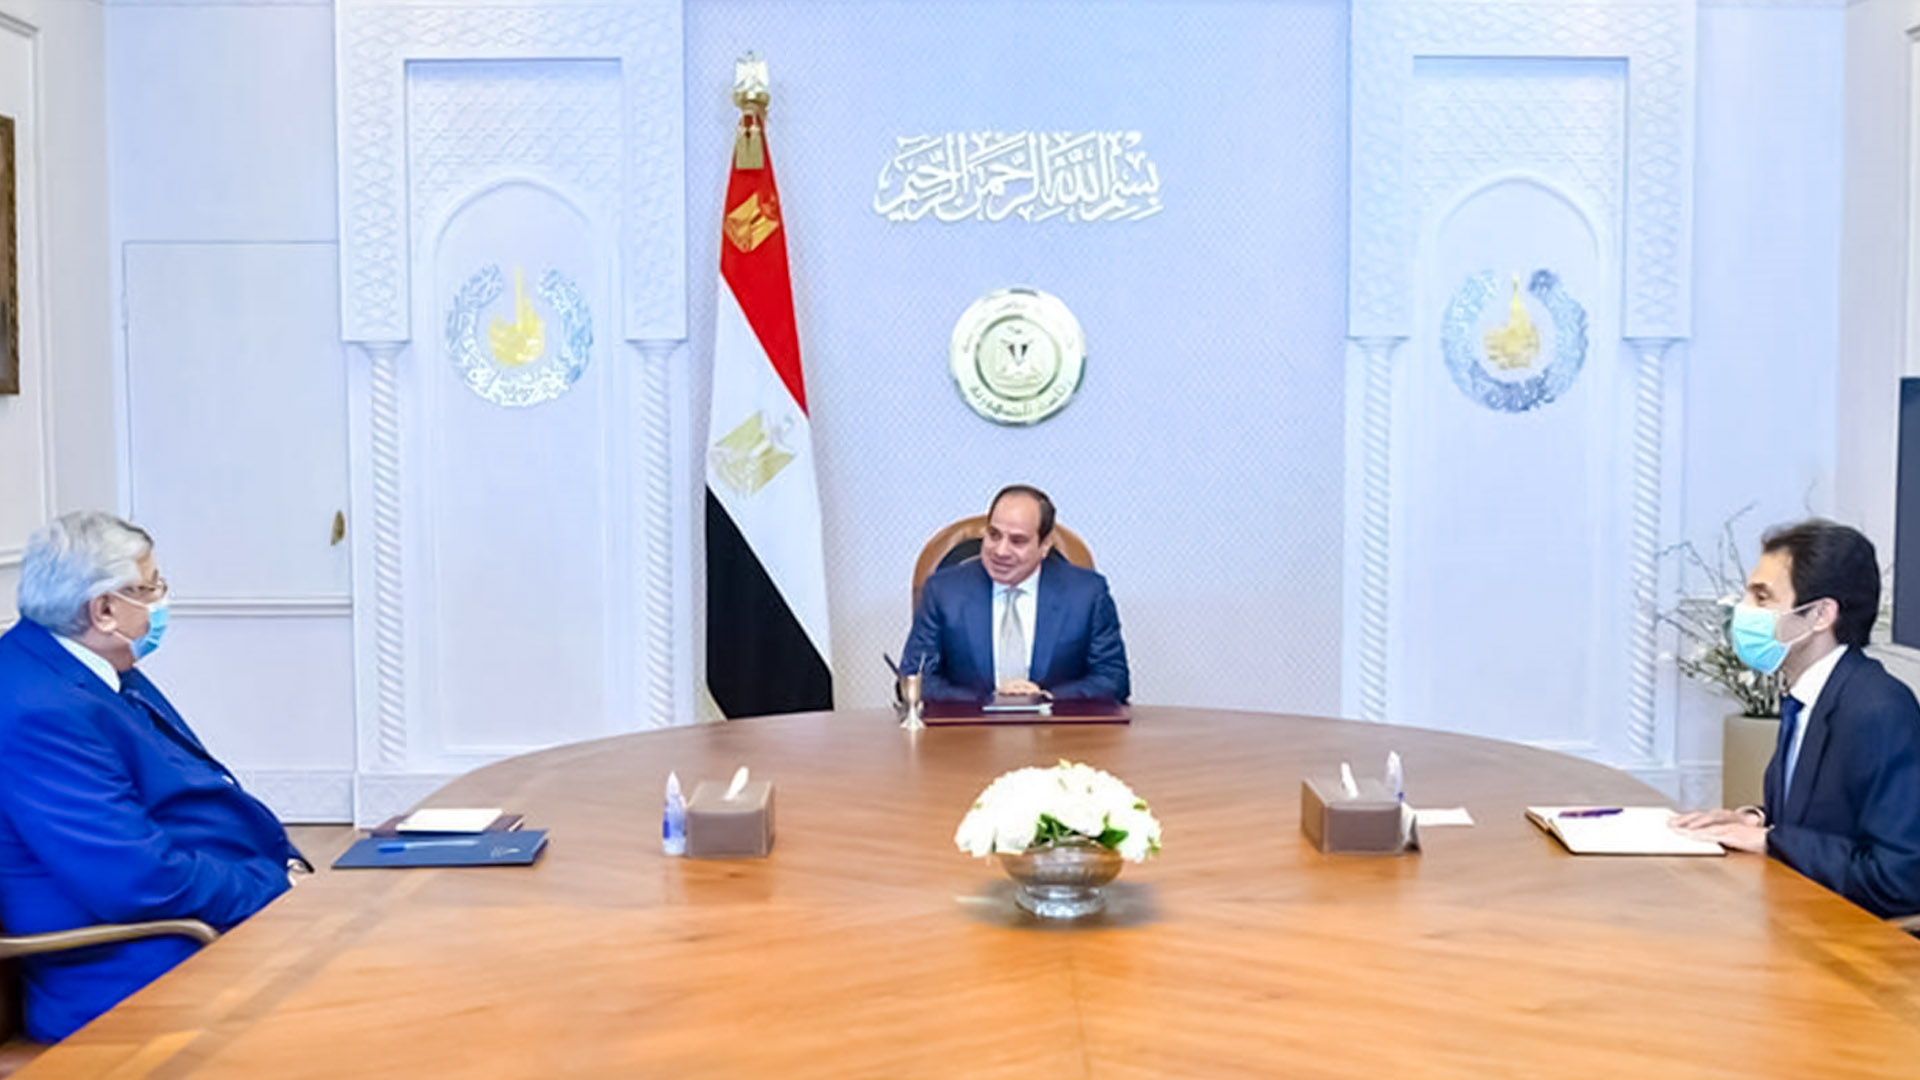 El-Sisi meets with the Presidential Advisor for Health and Prevention